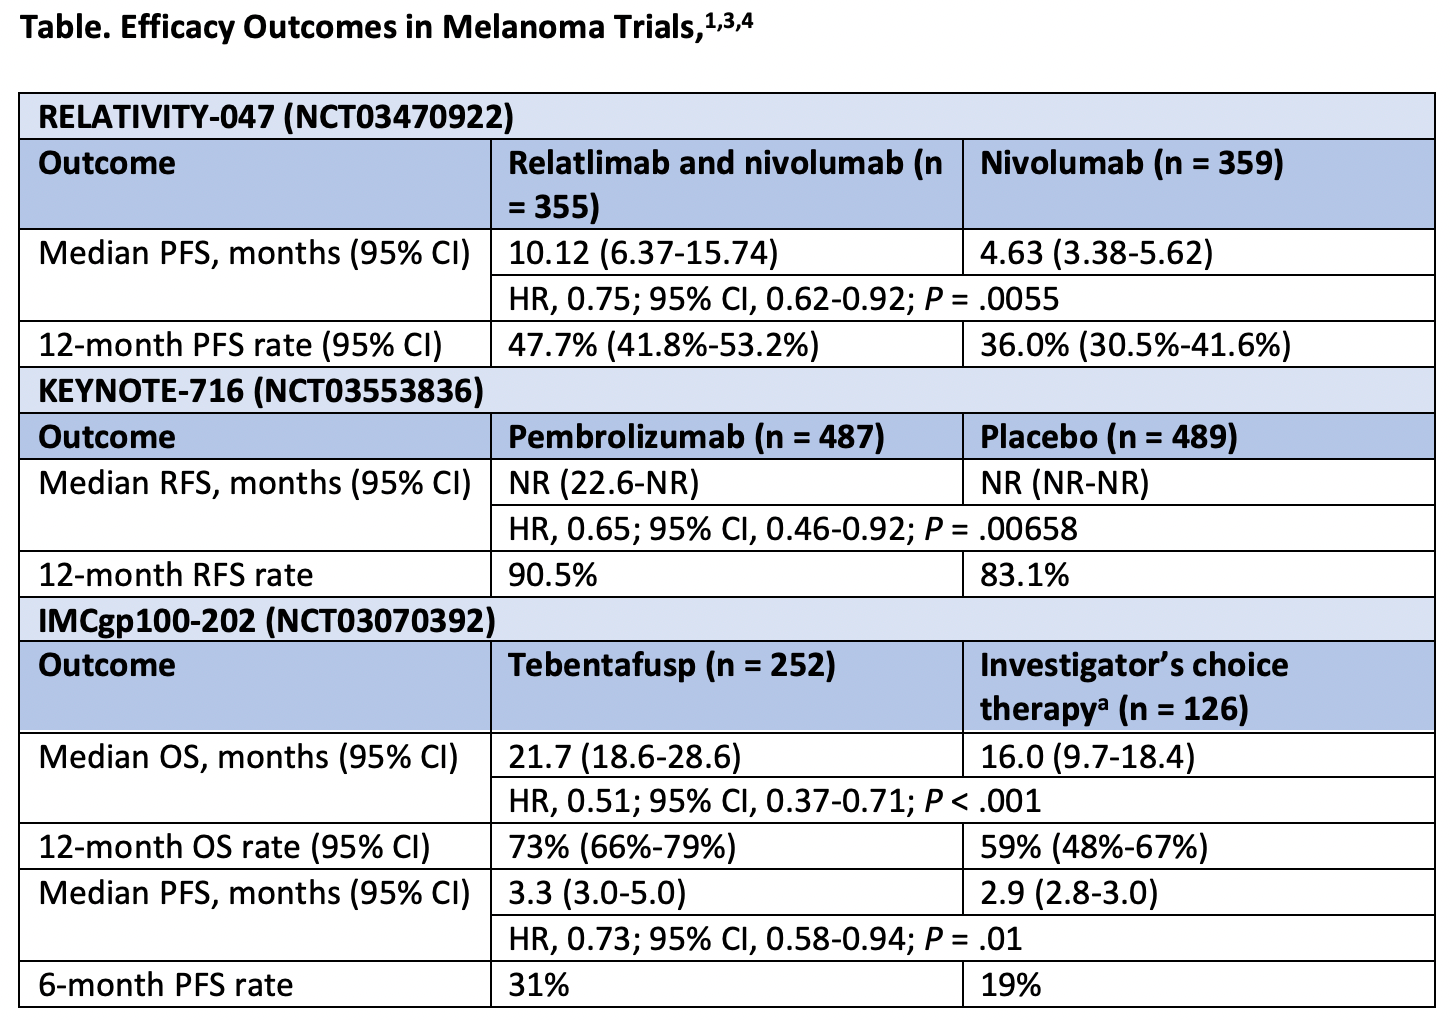 Table. Efficacy Outcomes in Melanoma Trials